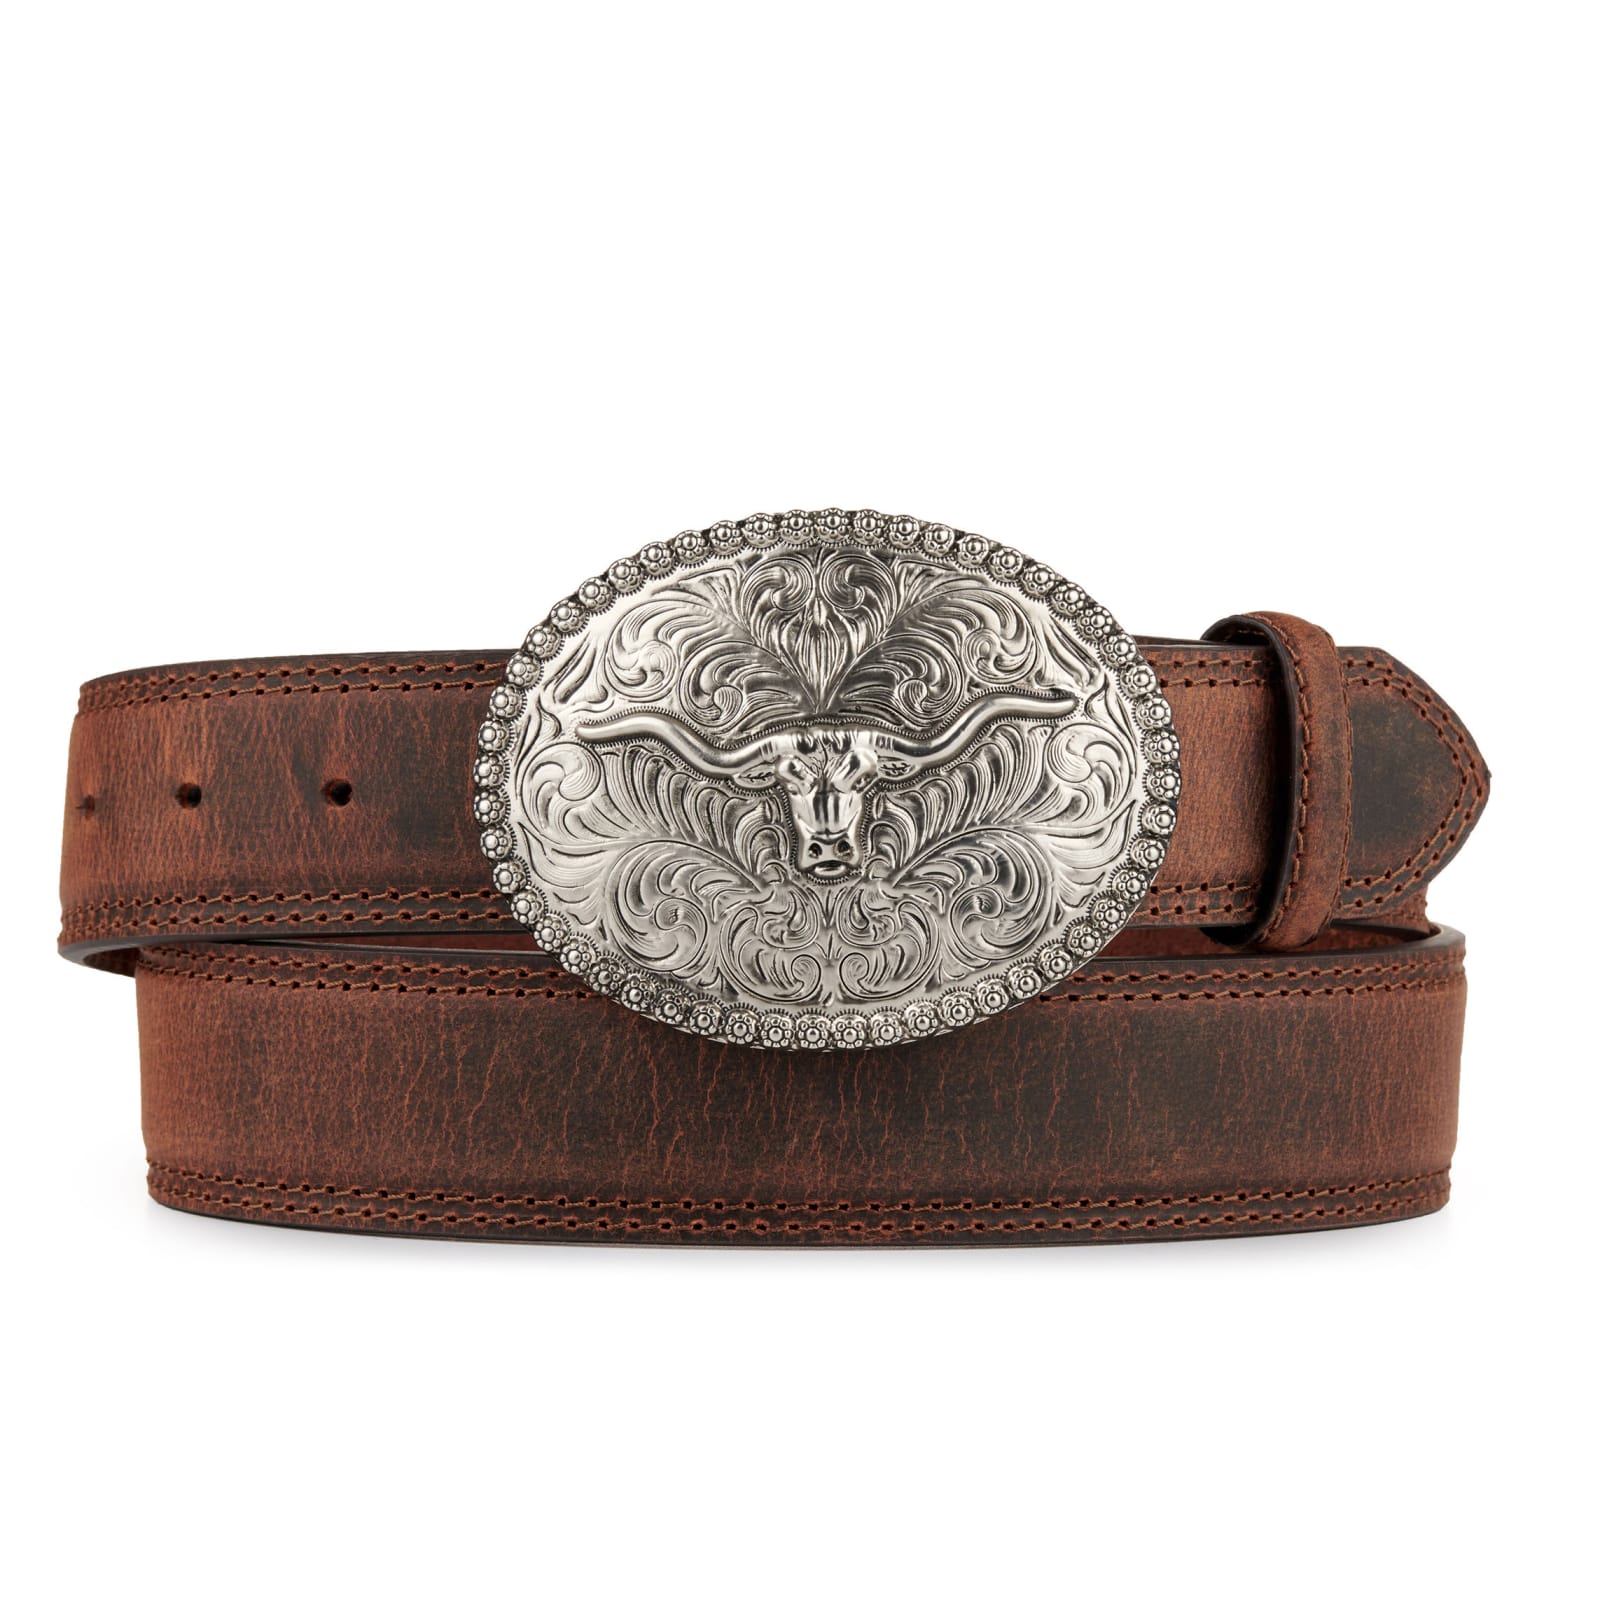 Men's Brown with Silver Longhorn Buckle Western Belt available at Cavenders